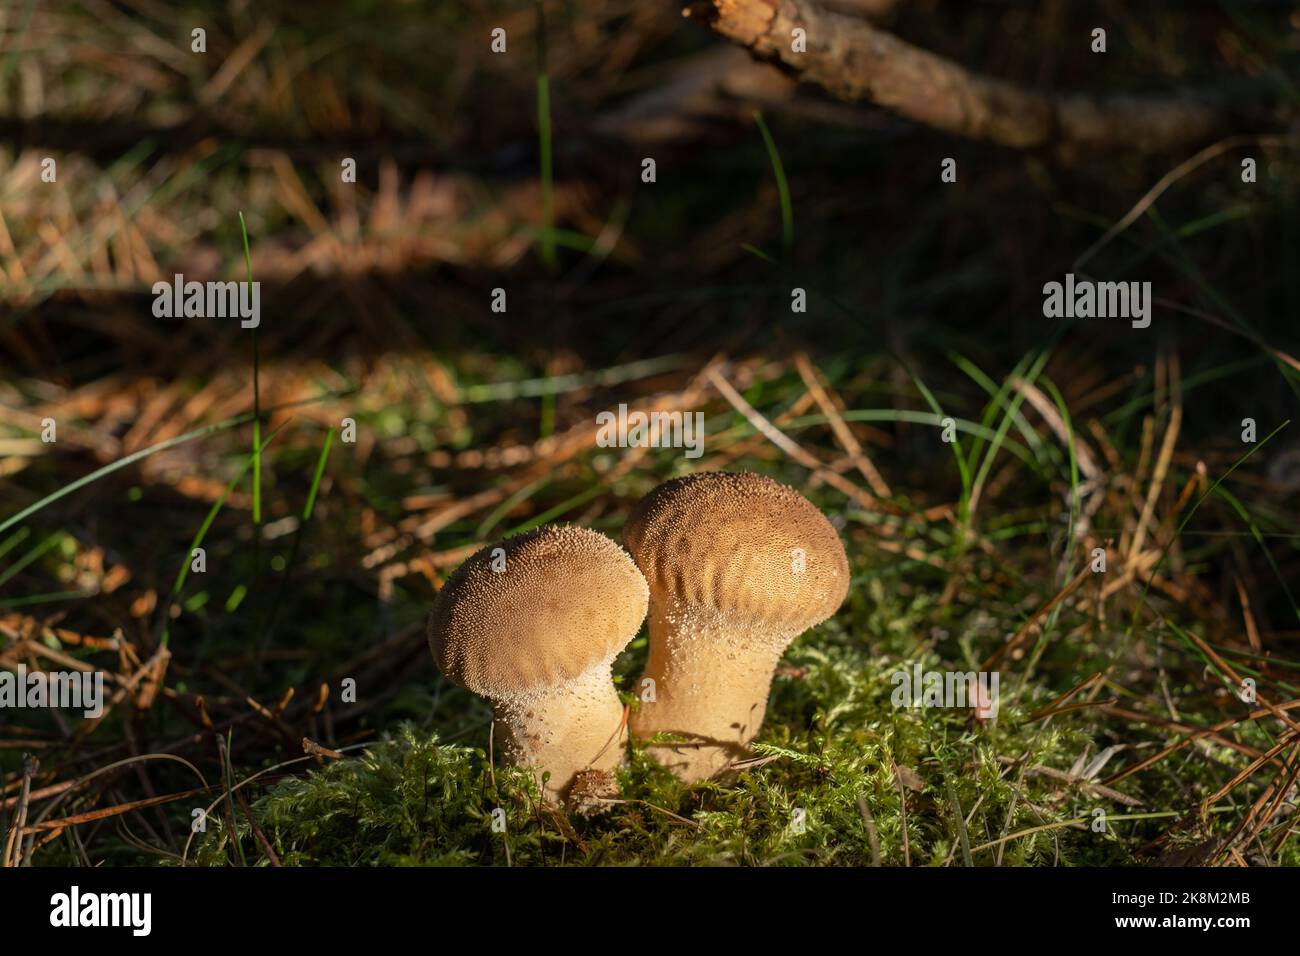 Forest fungus. Common puffball mushroom - Lycoperdon perlatum - growing in green moss in the autumn forest Stock Photo